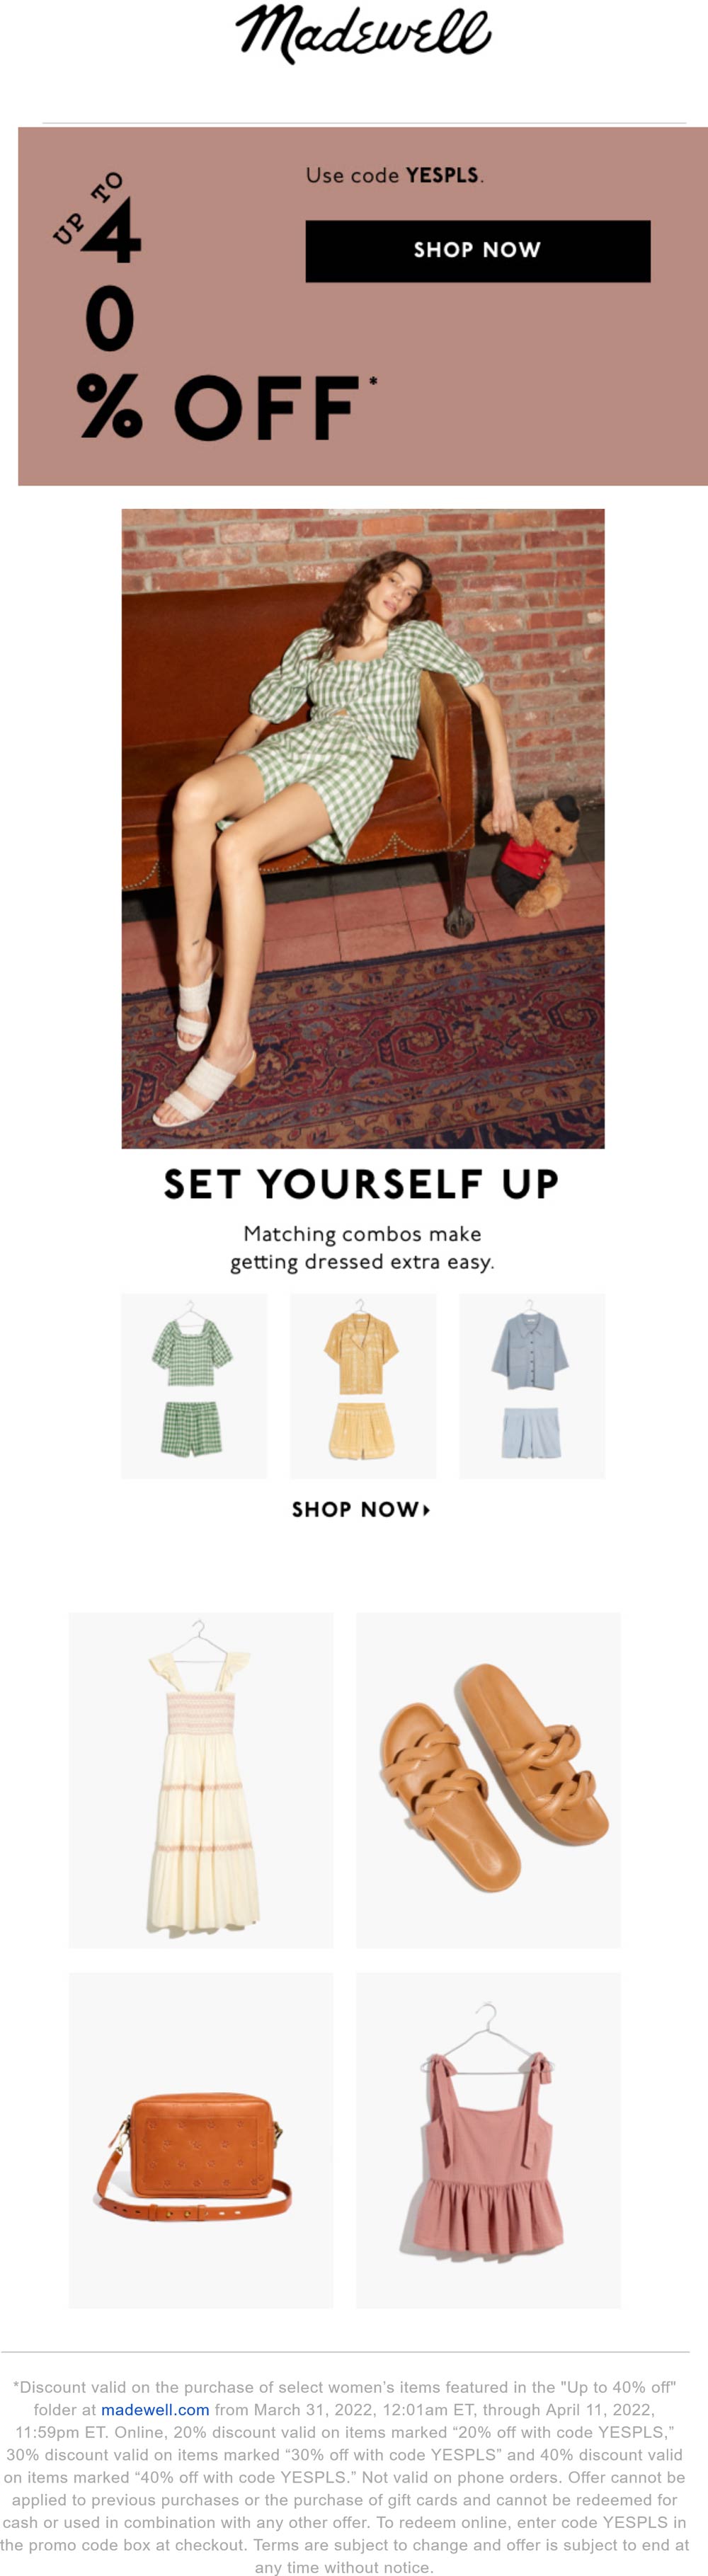 Madewell stores Coupon  20-40% off at Madewell via promo code YESPLS #madewell 